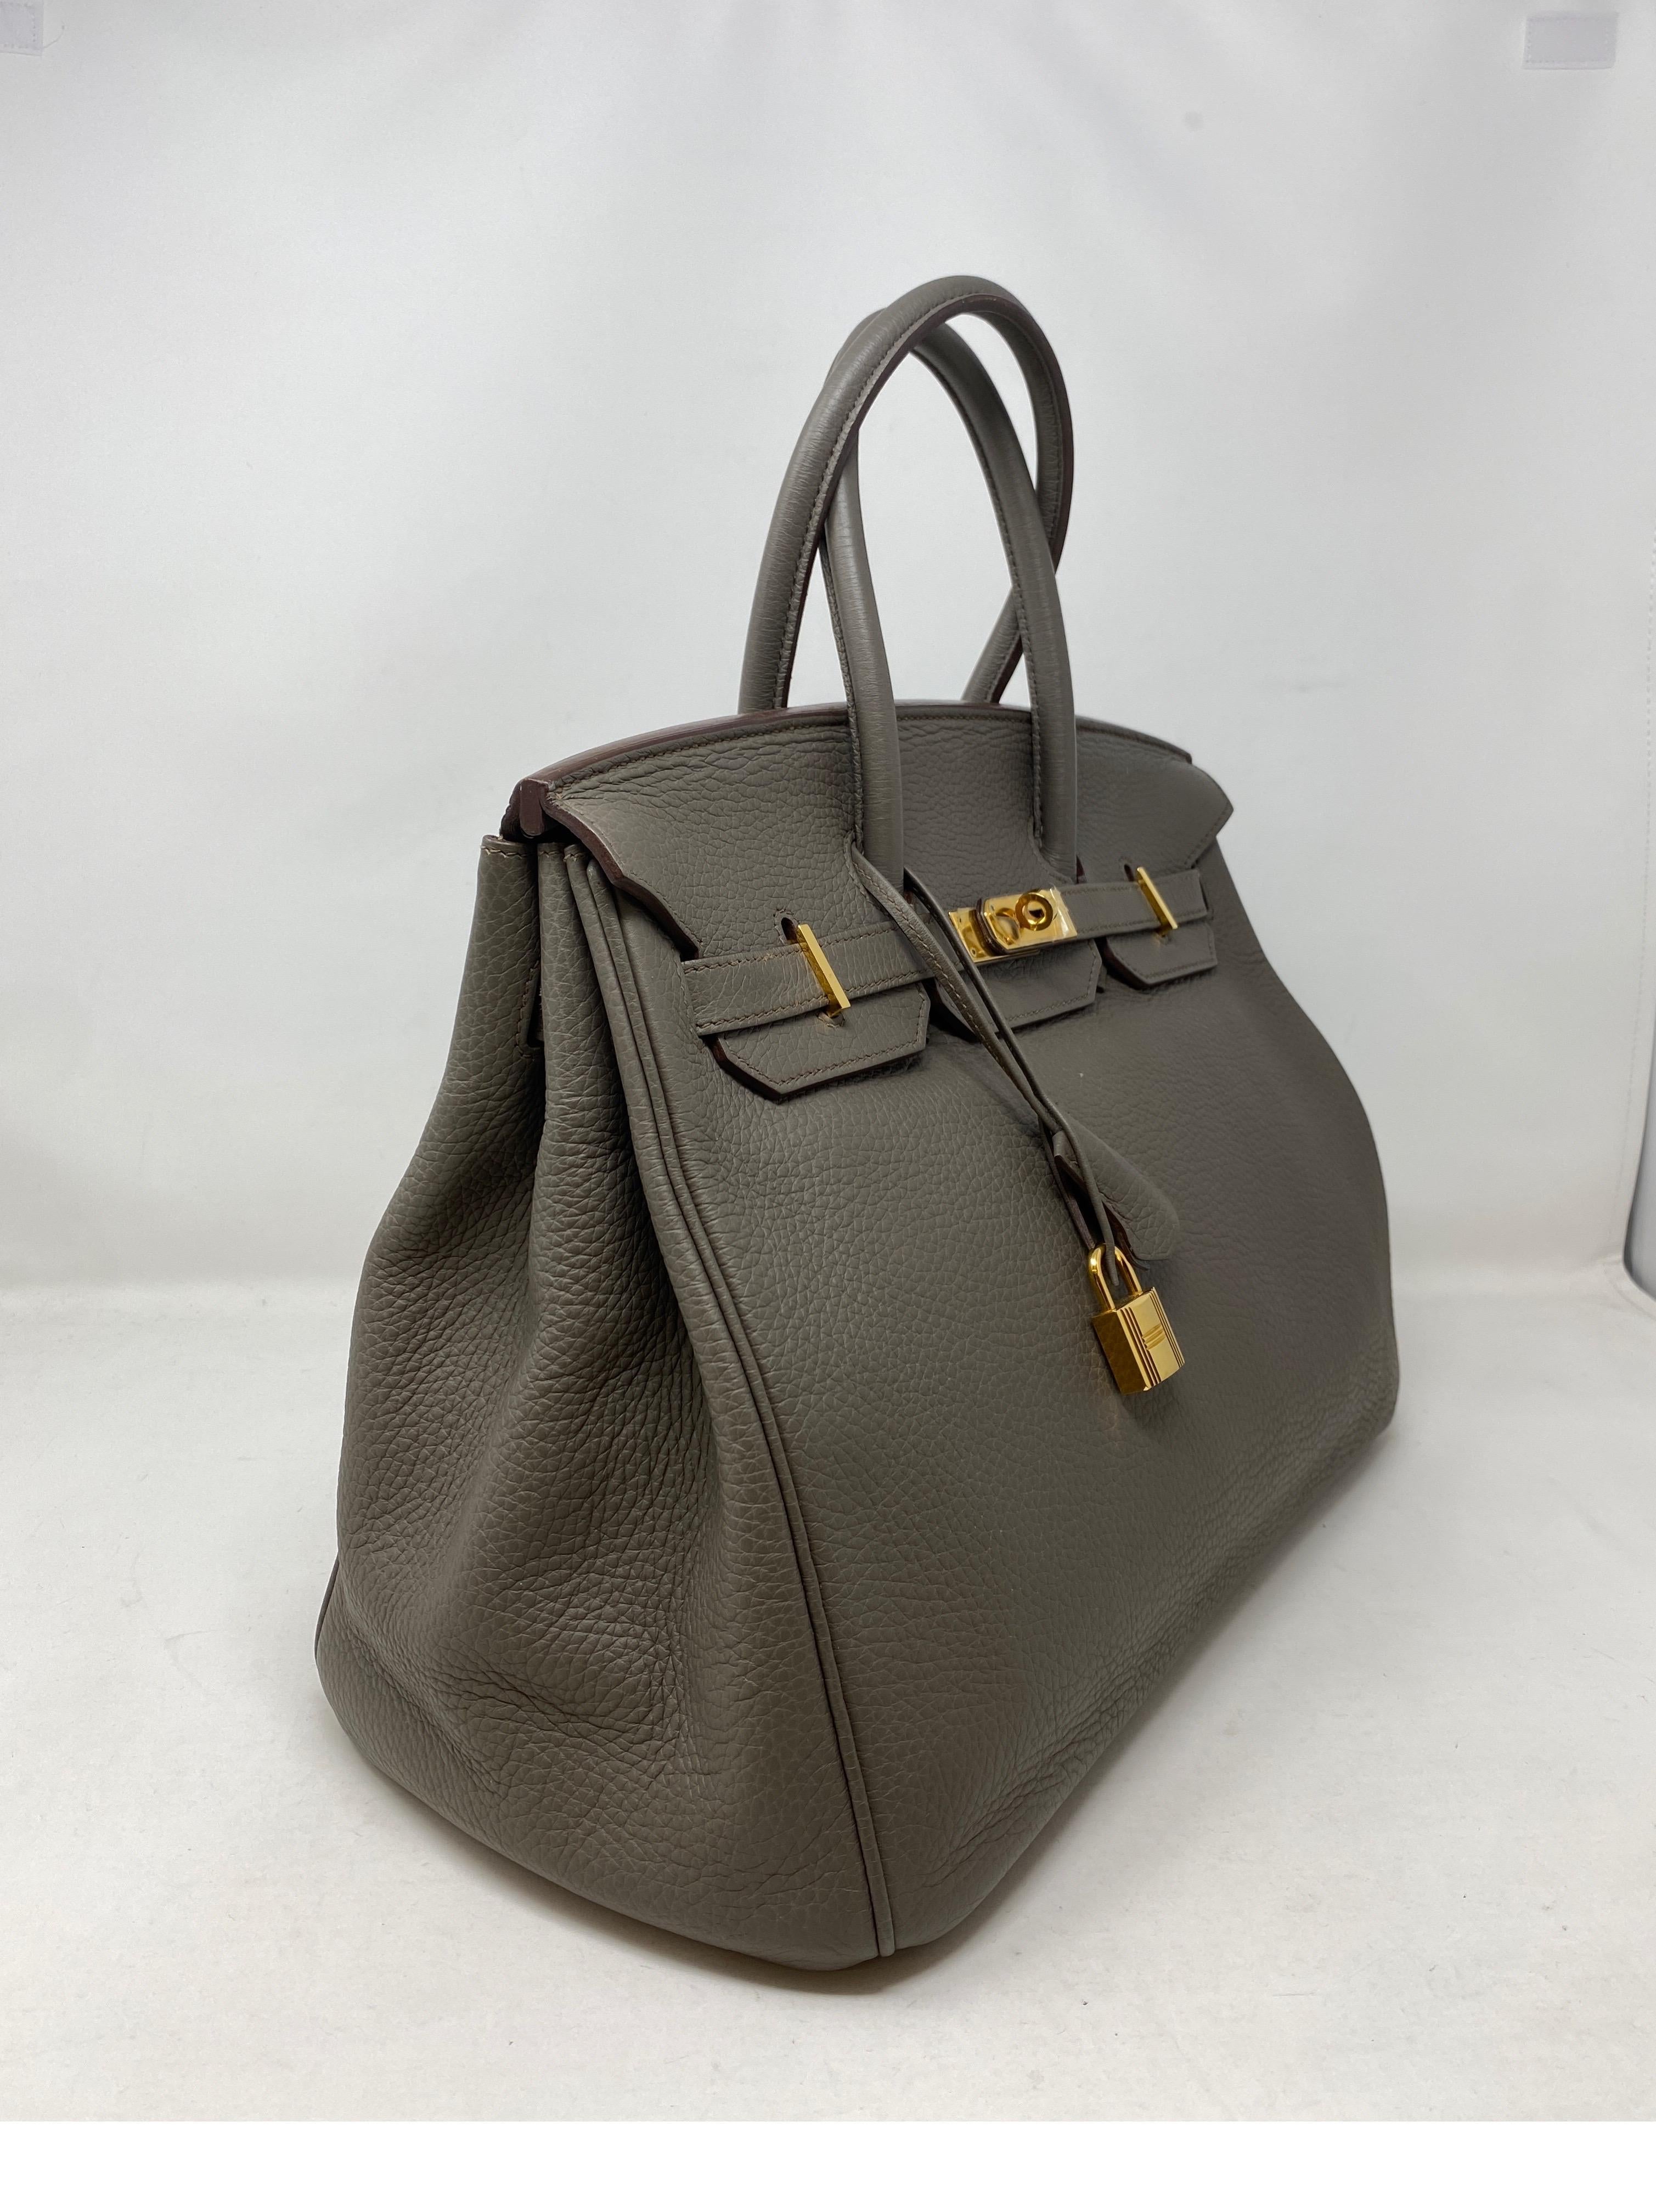 Hermes Birkin Etain 35 Bag. Gold hardware. Excellent condition. Hard combination to find. Great investment bag. Guaranteed authentic. 